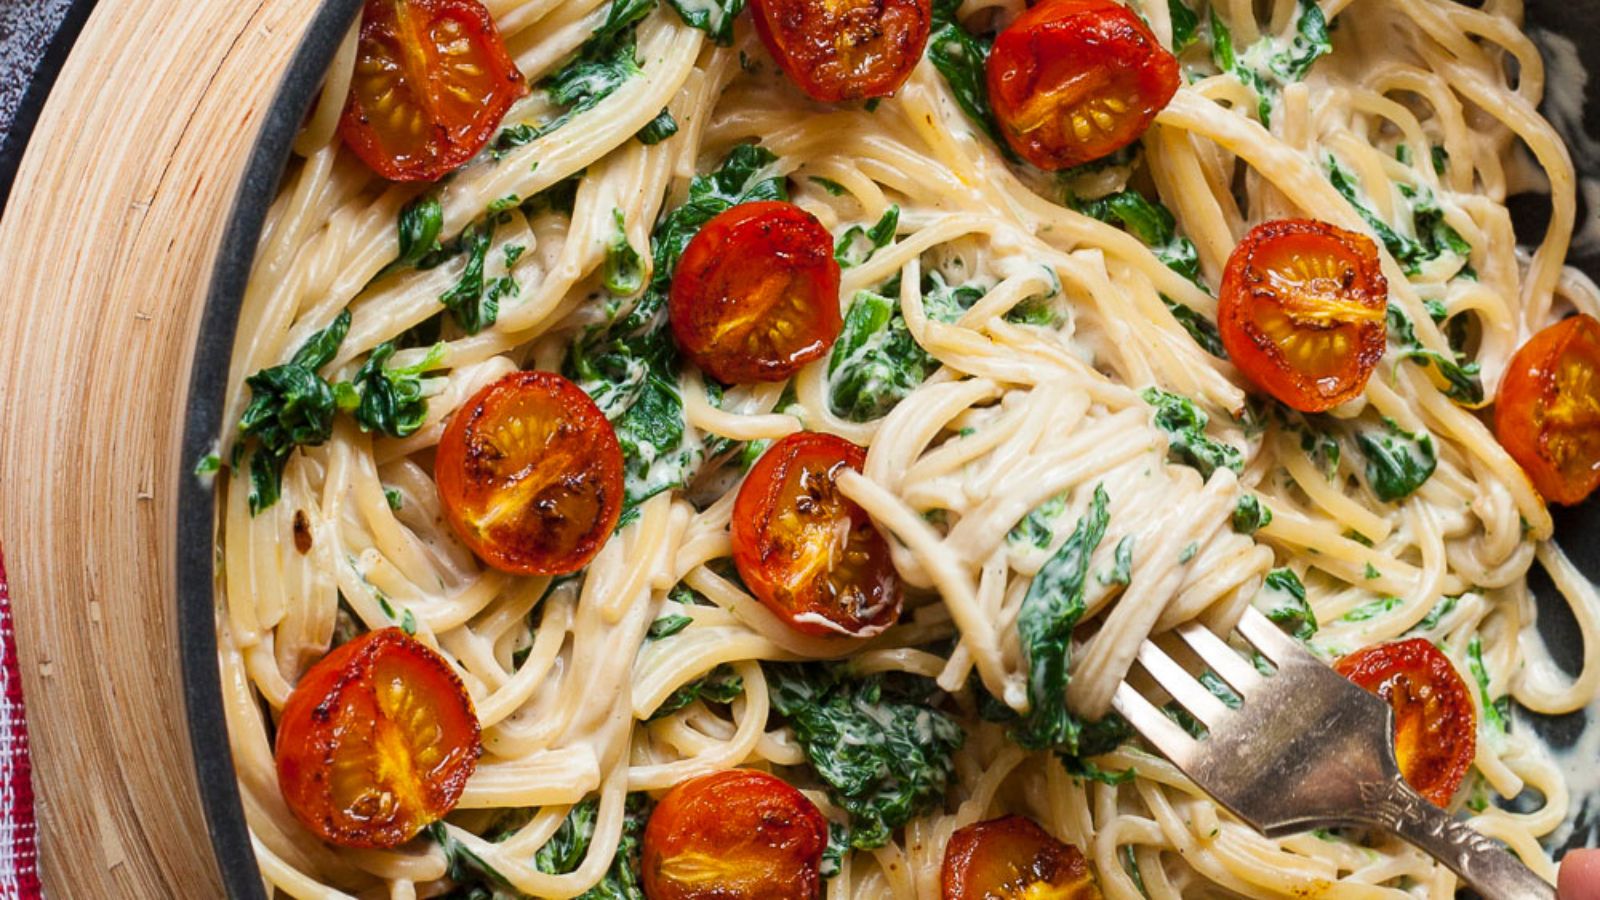 22 Wholesome Date Night Recipes to Keep Your Progress in Check